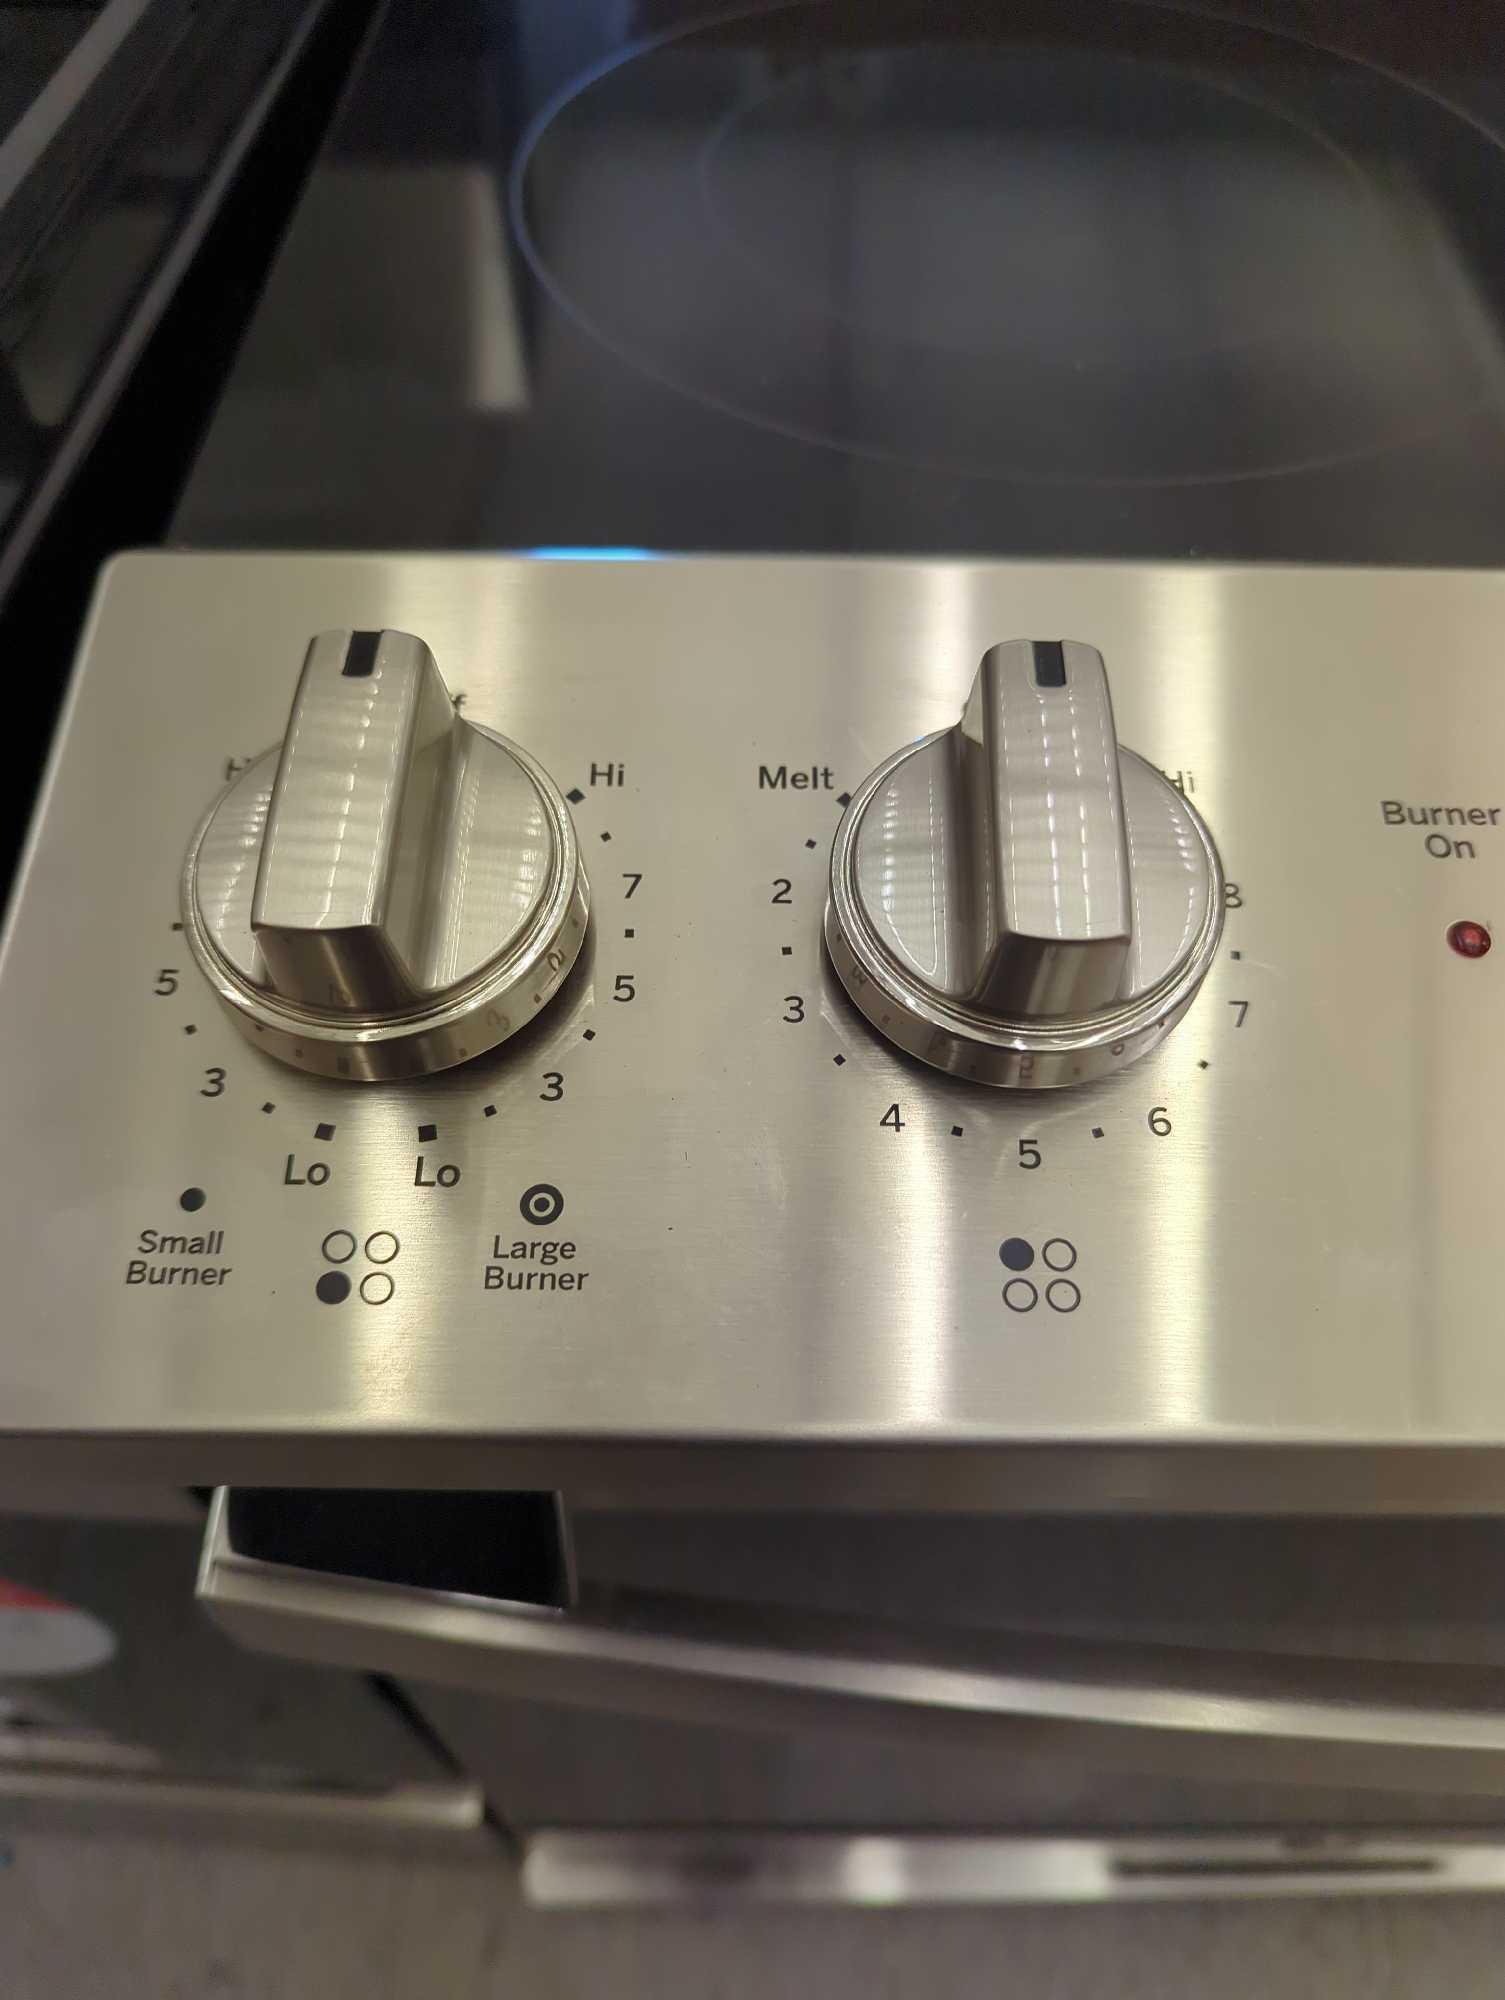 (Has Some Minor Denting) GE 30 in. 5 Element Slide-In Electric Range in Stainless Steel with Crisp